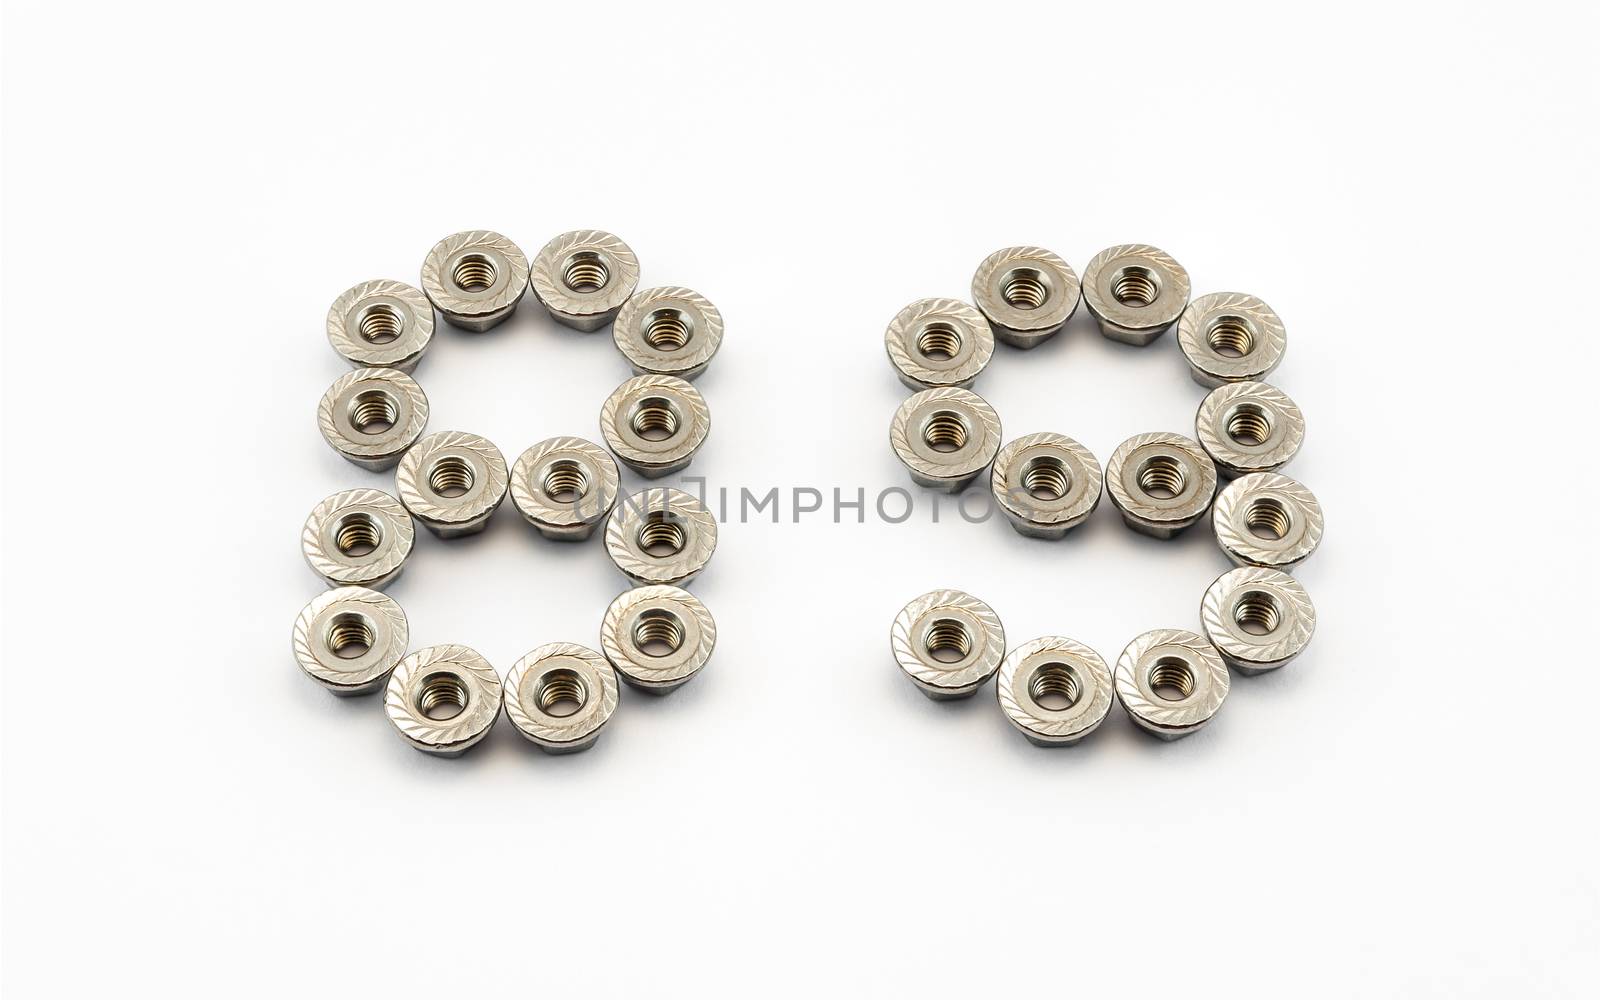 8 and 9 Number, Created by Stainless Steel Hex Flange Nuts.